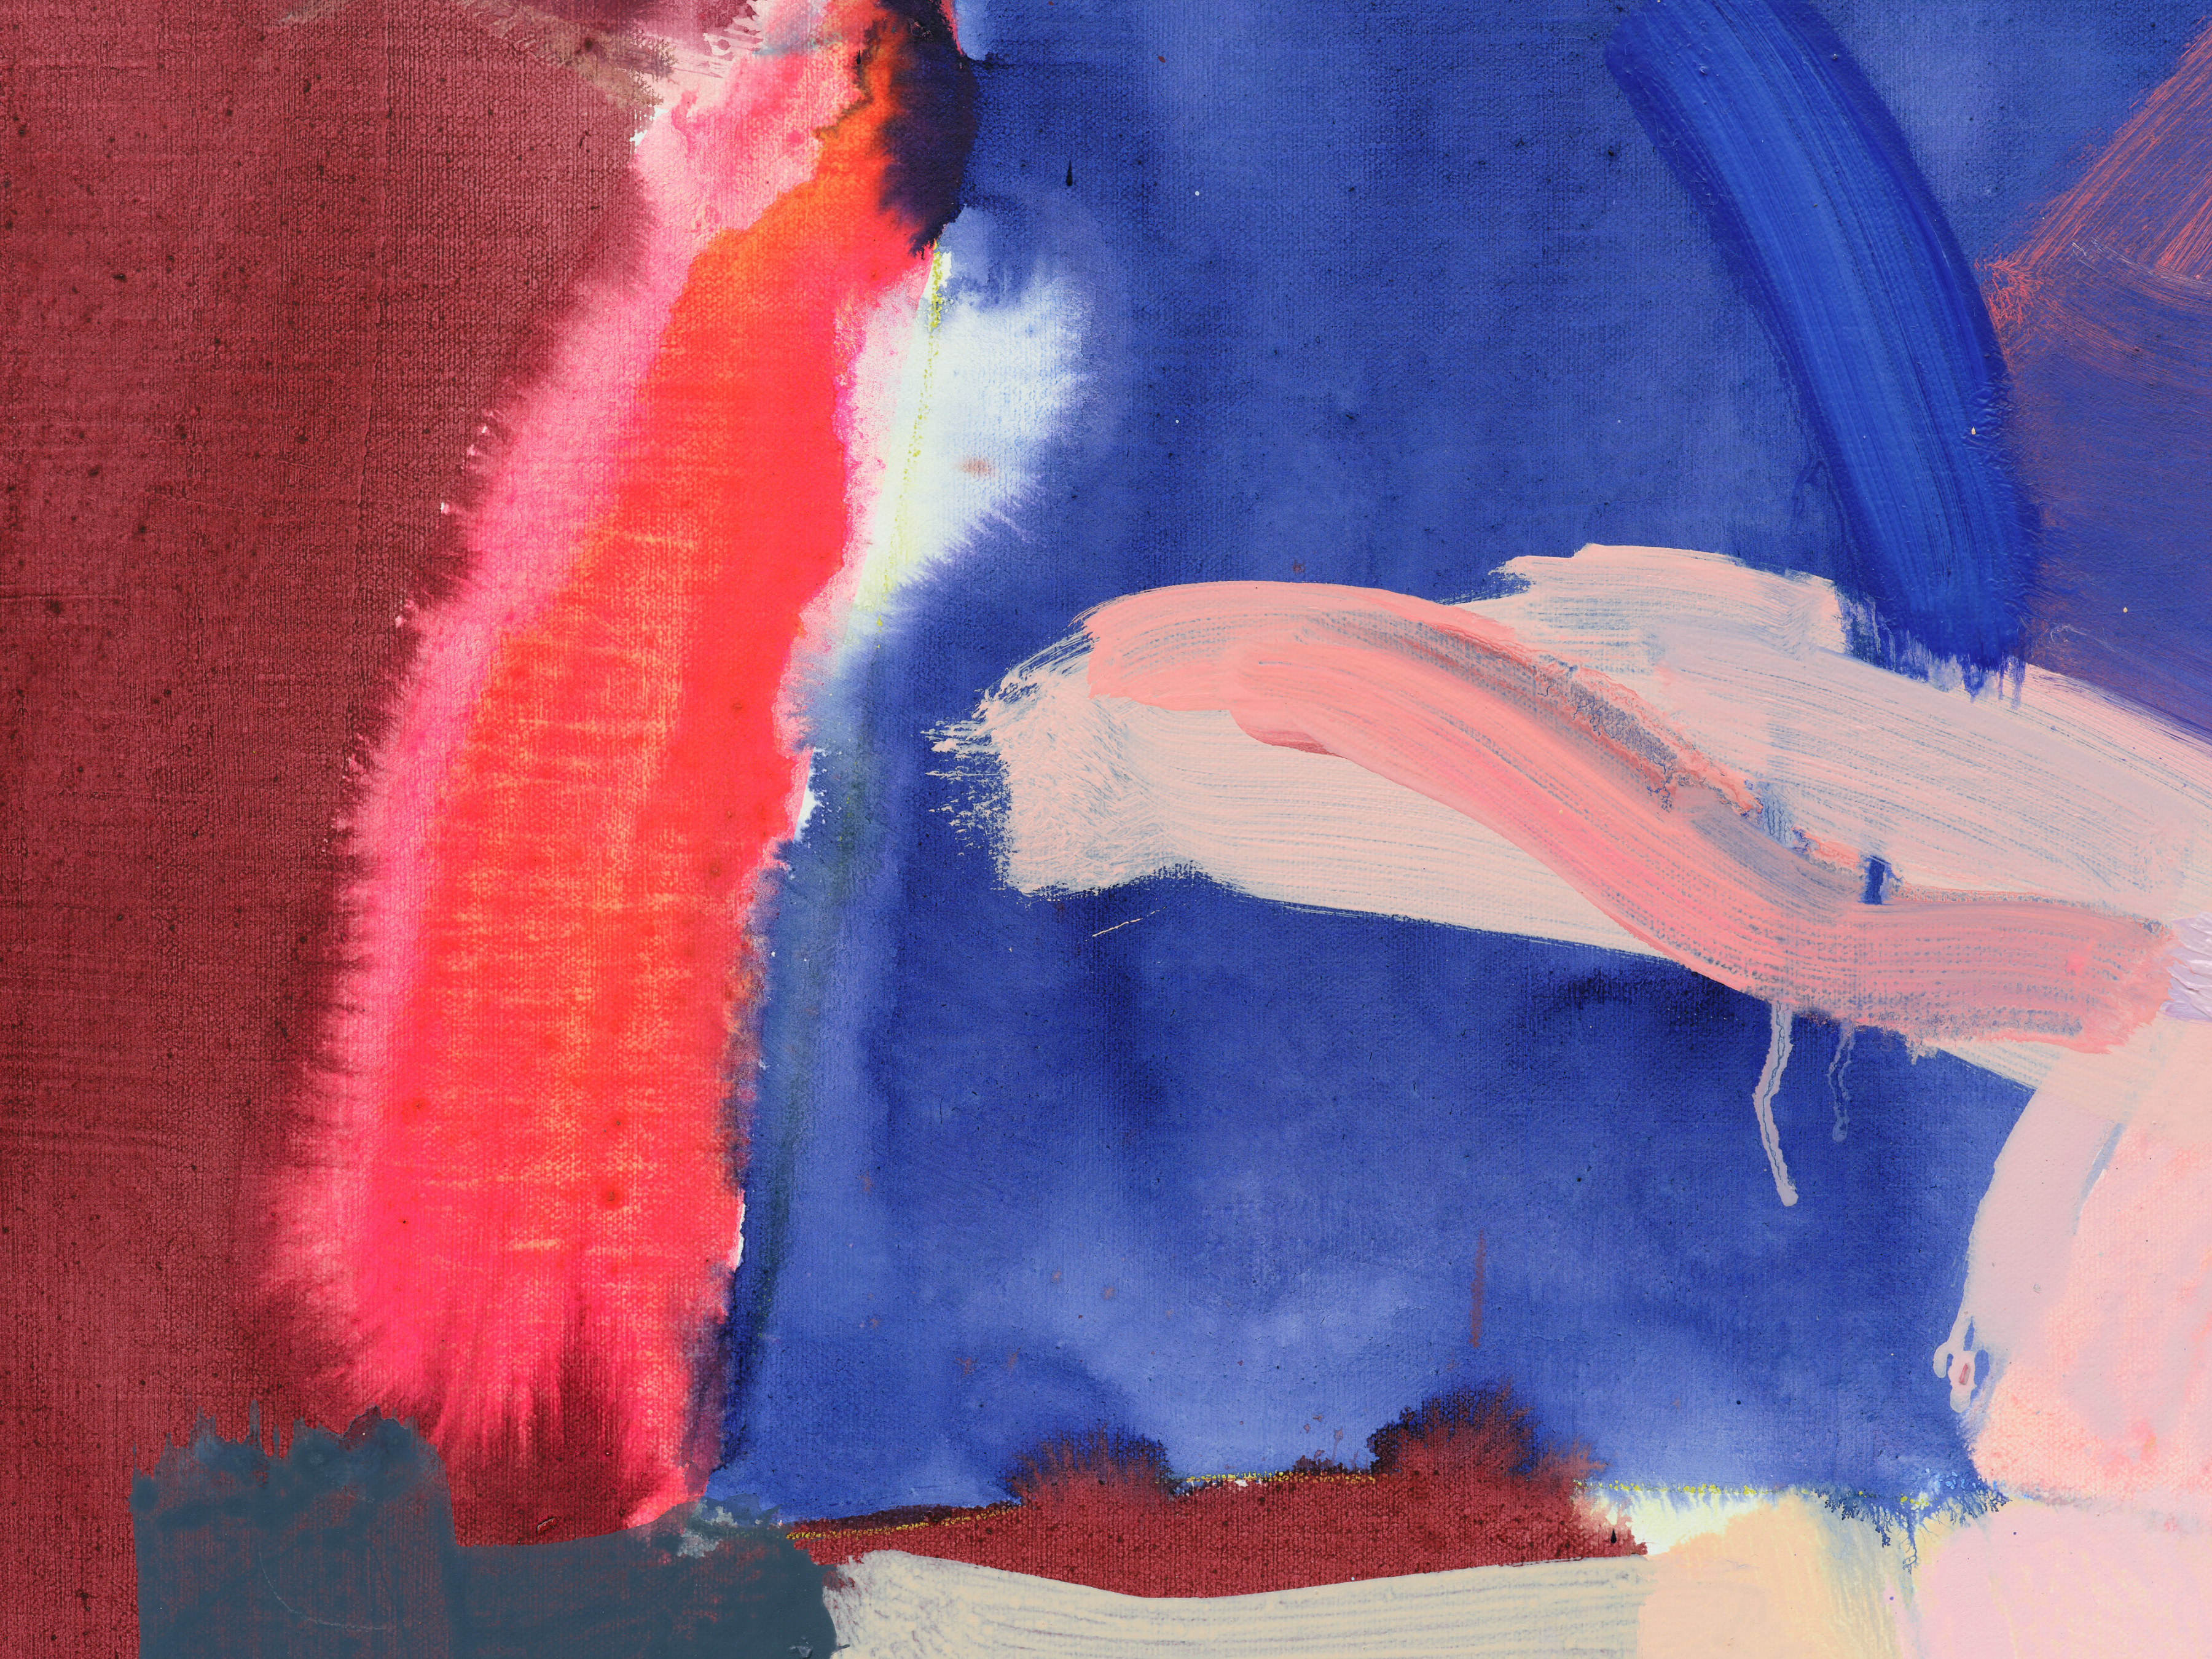 Detail of fuscia, pink and blue swatches in Sarah Awad's "Blind by Nature"